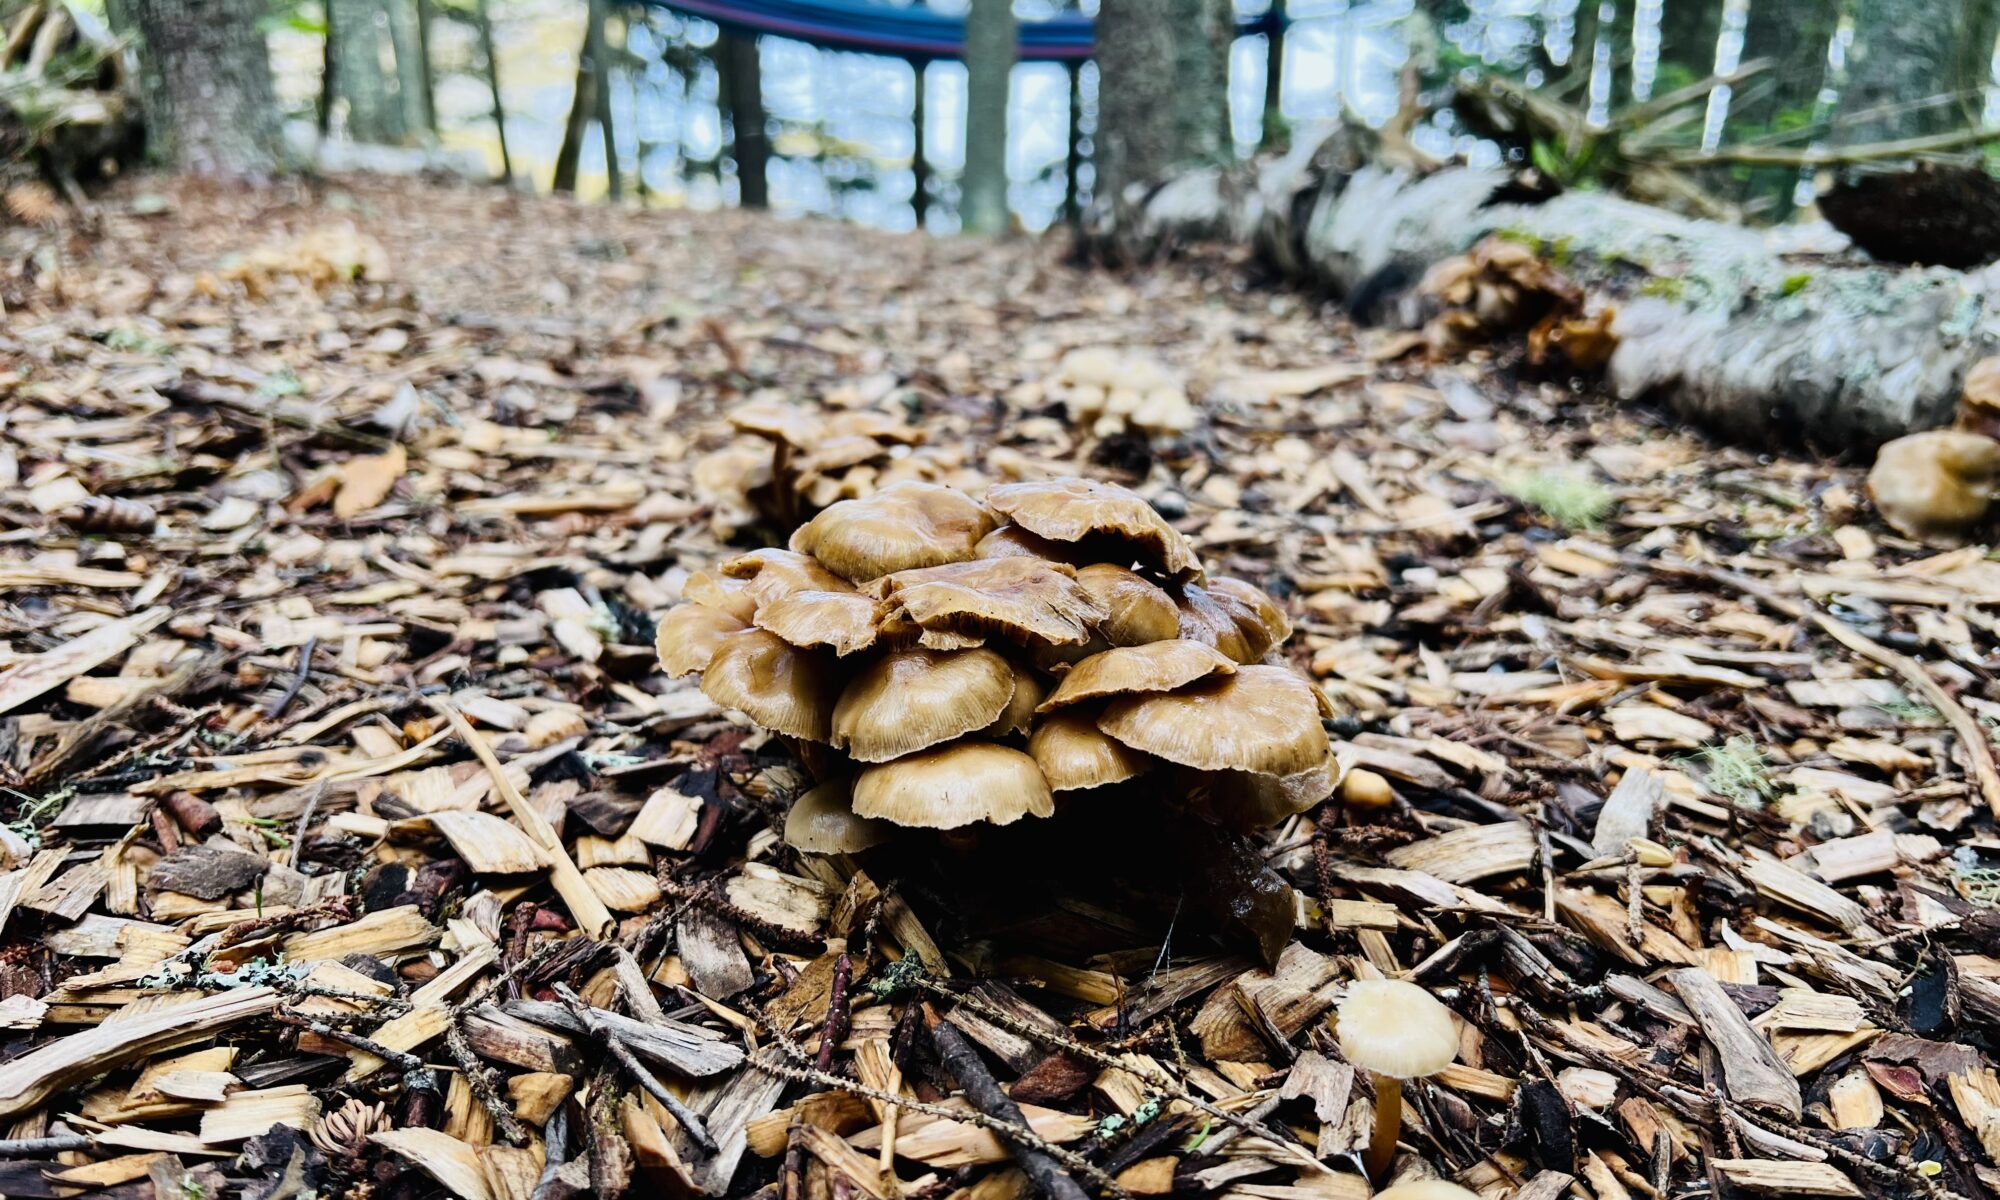 mushrooms on a forest wood chip path foreground with blue hammock and ocean in background